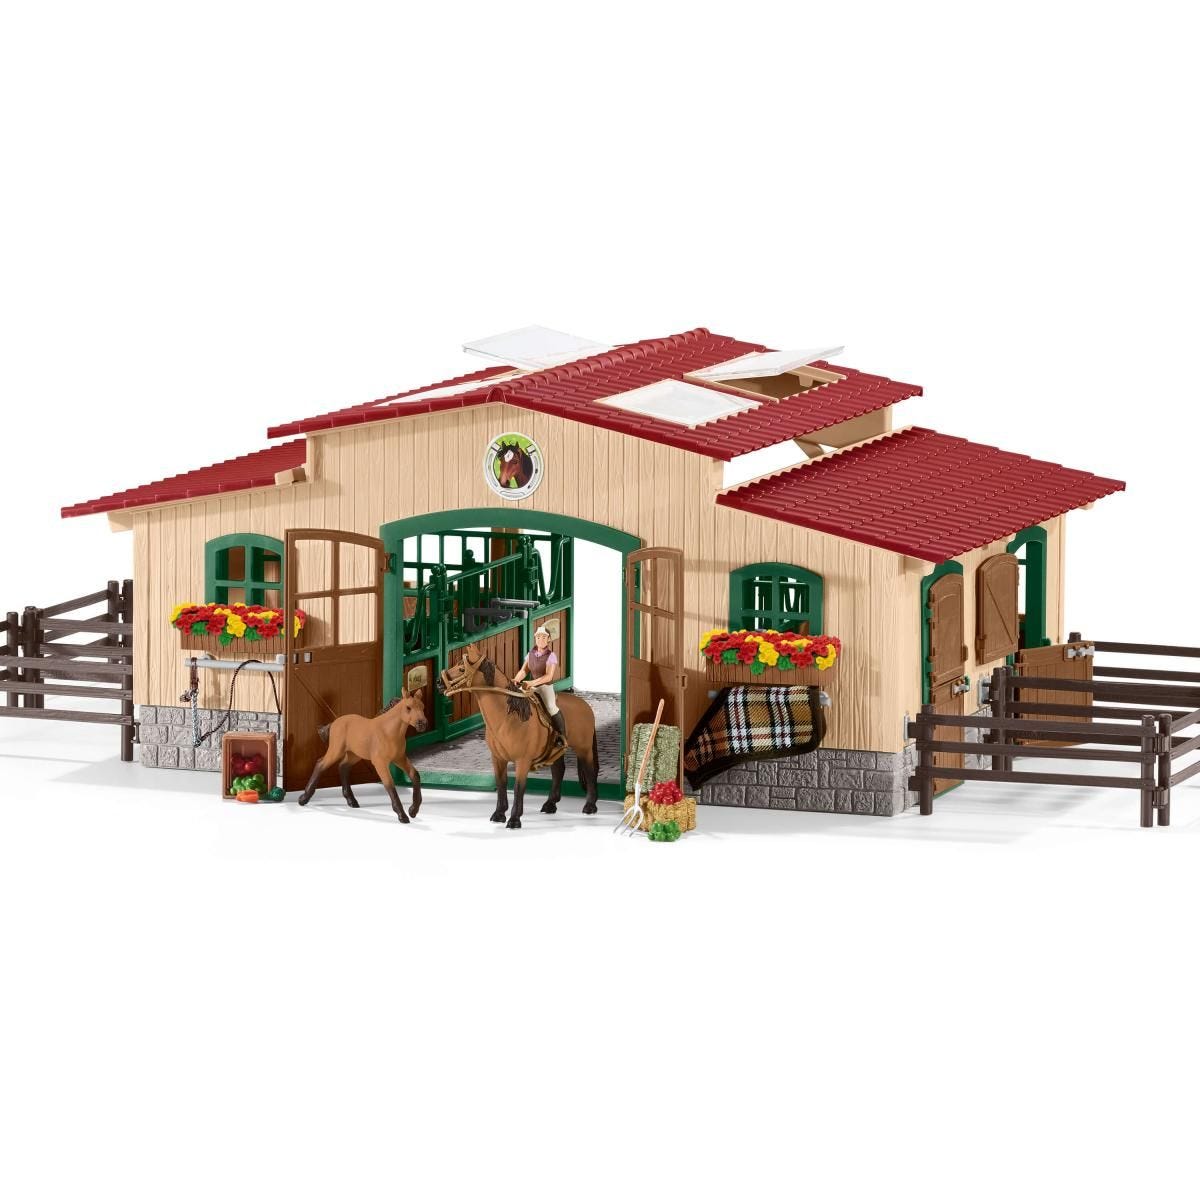 Schleich Farm World, Farm Animal Gifts for Kids, Horse Stable with Horse Toy Barn and Accessories 48-piece set (Amazon Toy Catalog 2022), Ages 3+